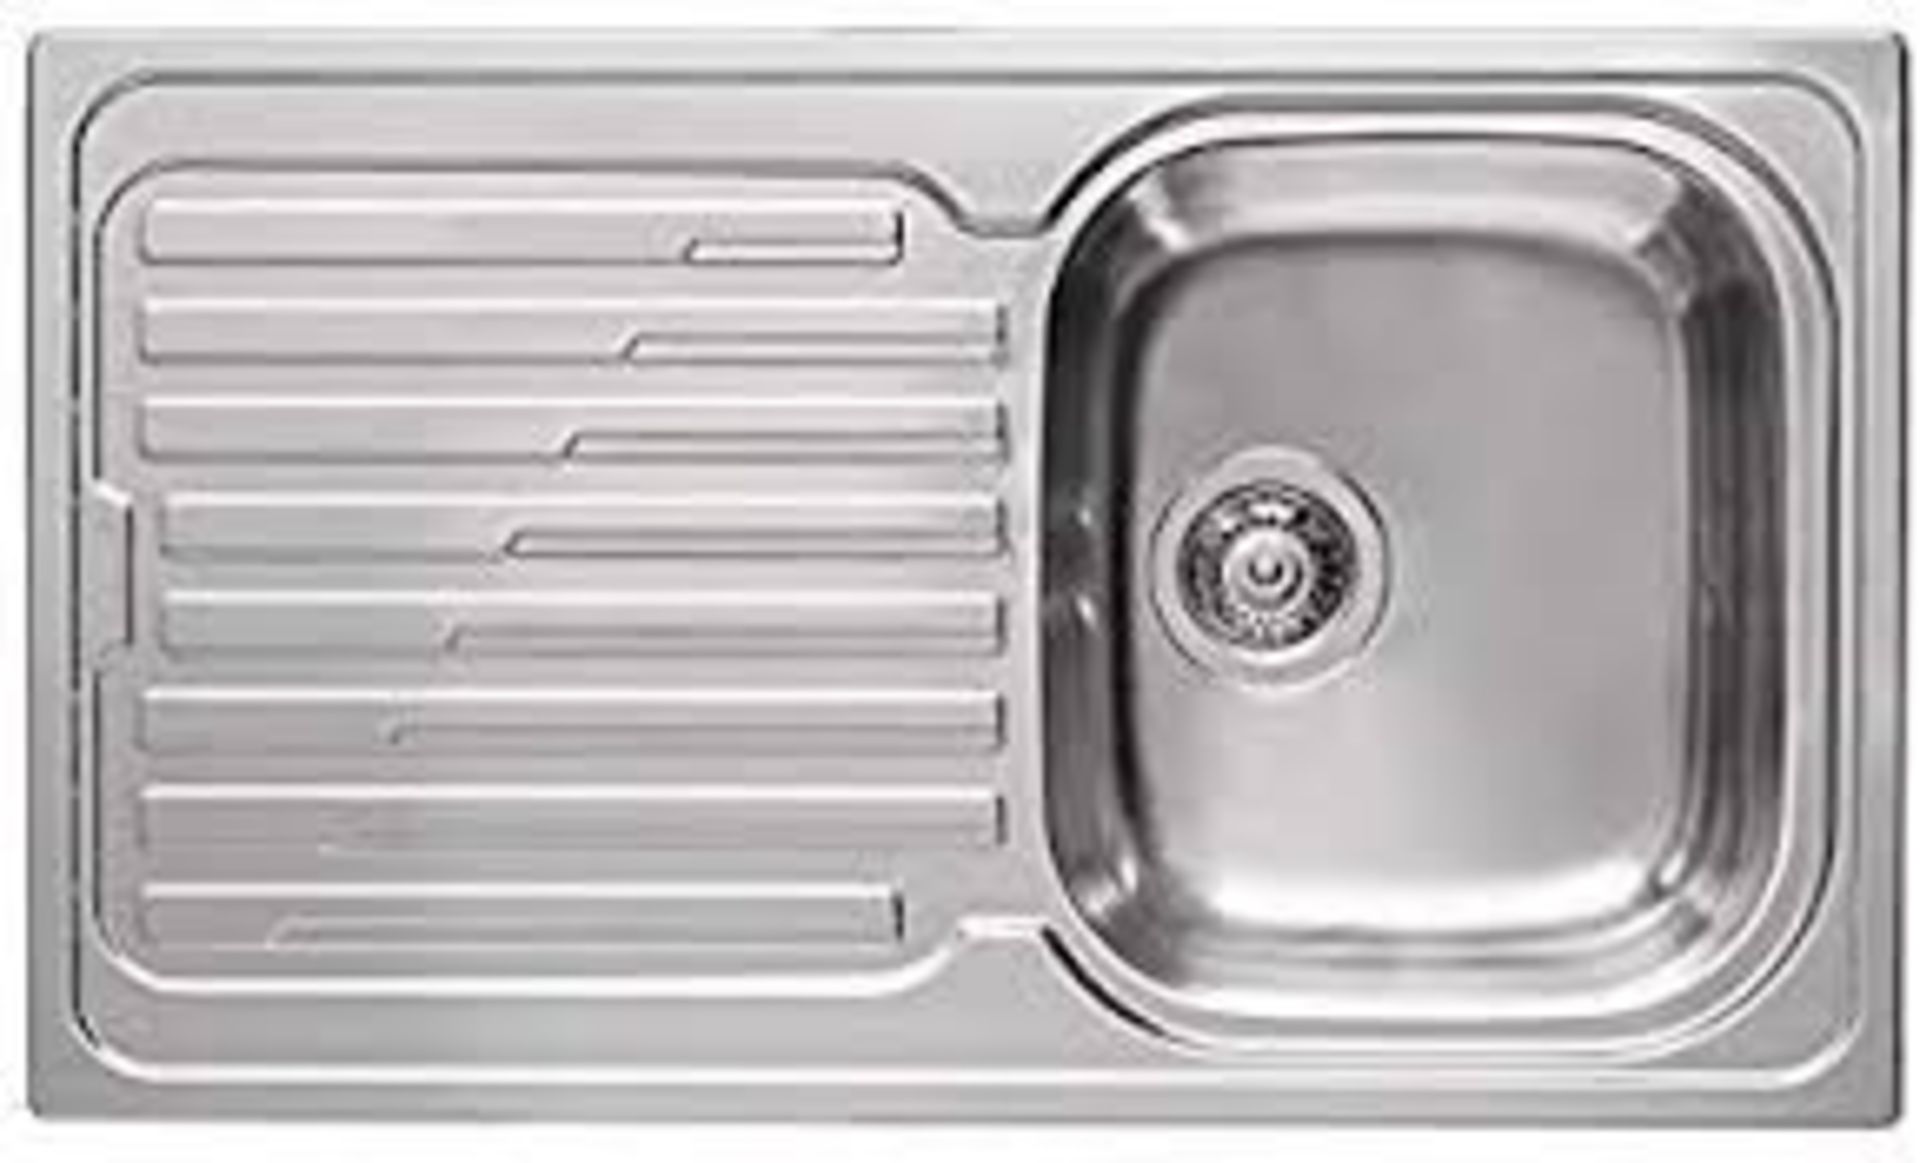 Boxed Blanco Stainless Steel Sink RRP £400 (18362) (Public Viewings & Appraisals Available)